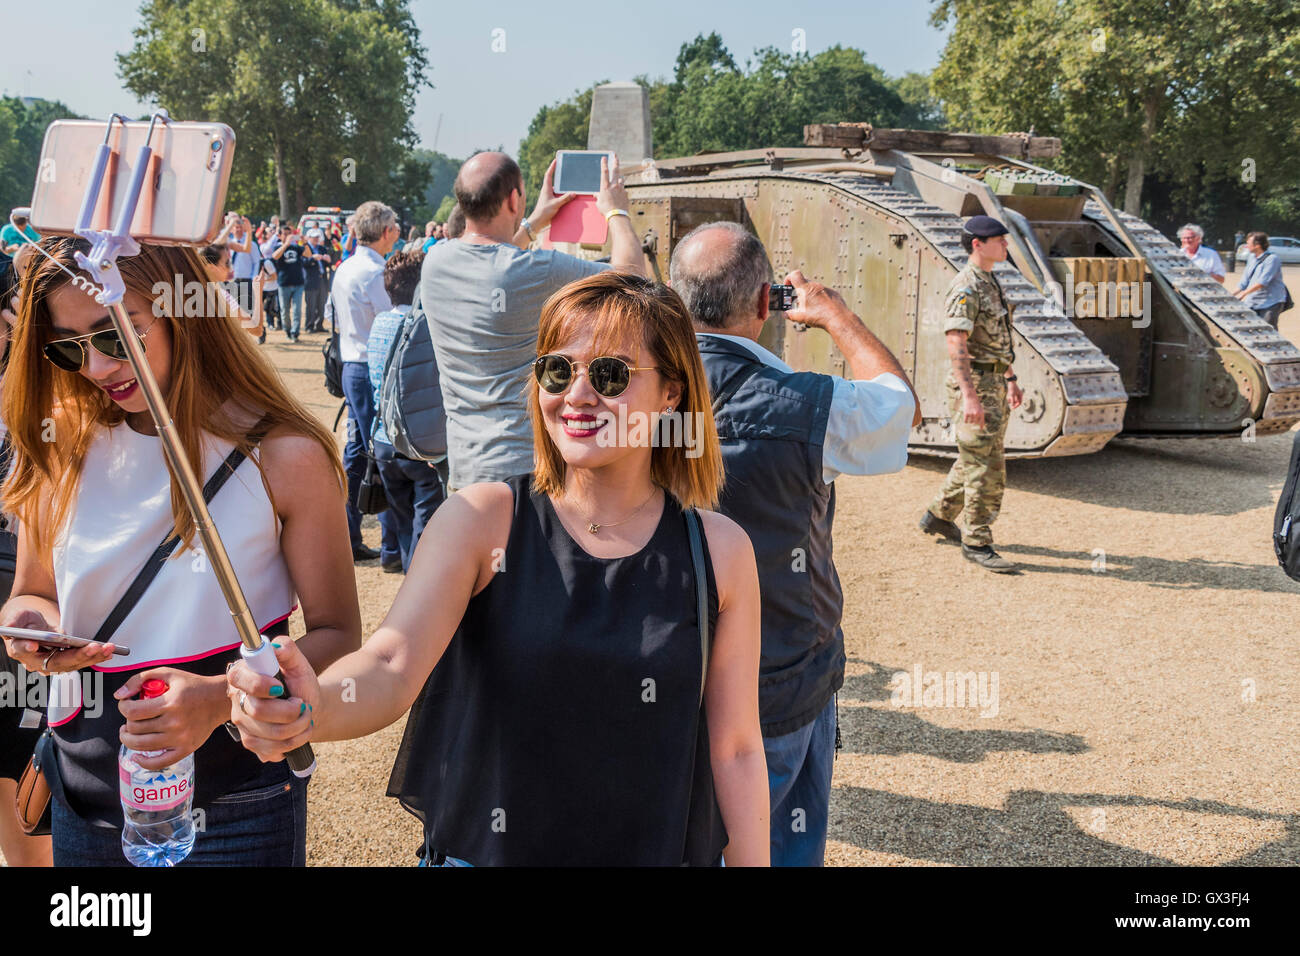 London, UK. 15th September, 2016. The tank arrives on Horse Guards Parade  where tourists take selfies and it  meets its contemporary sister, a Challenger tank of the Royal Tank Regiment - A replica of a World War One tank brought to London to mark the 100th anniversary its first use in action in the Battle of the Somme on 15 September 1916. Dorset's Tank Museum, provided the machine which was designed to travel at walking pace (3mph) to support the infantry. Credit:  Guy Bell/Alamy Live News Stock Photo